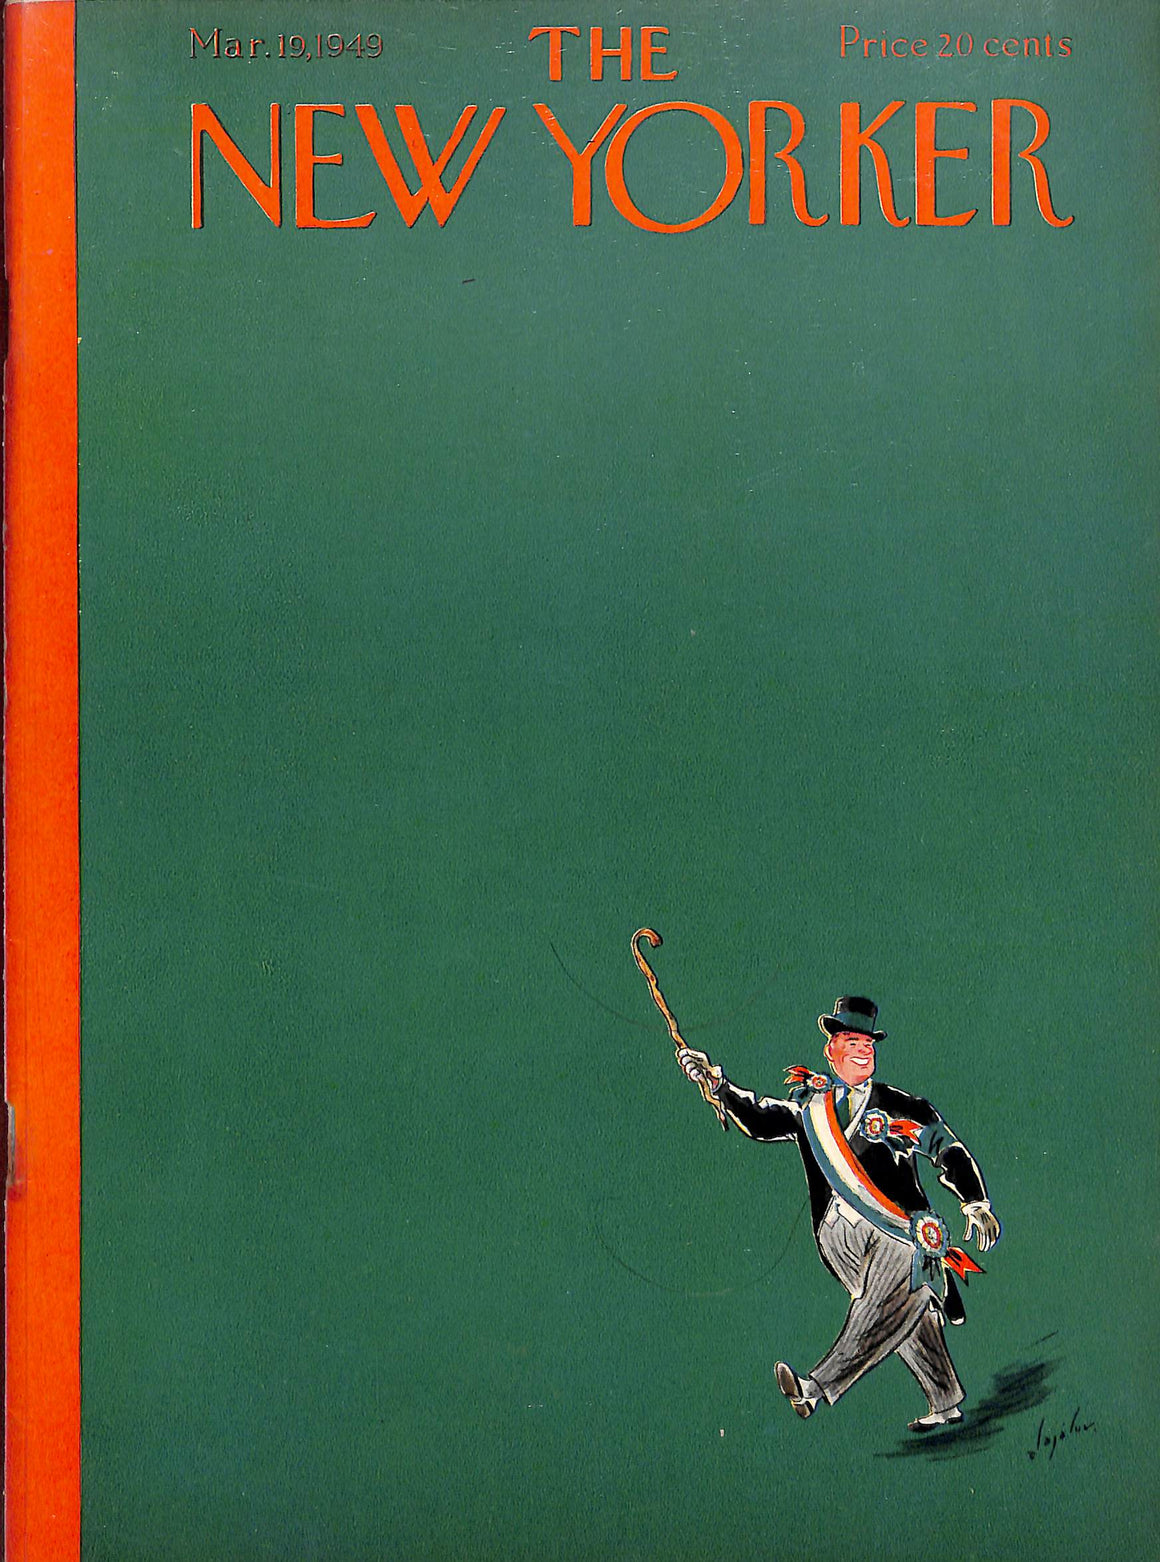 The New Yorker Mar. 19, 1949 (SOLD)